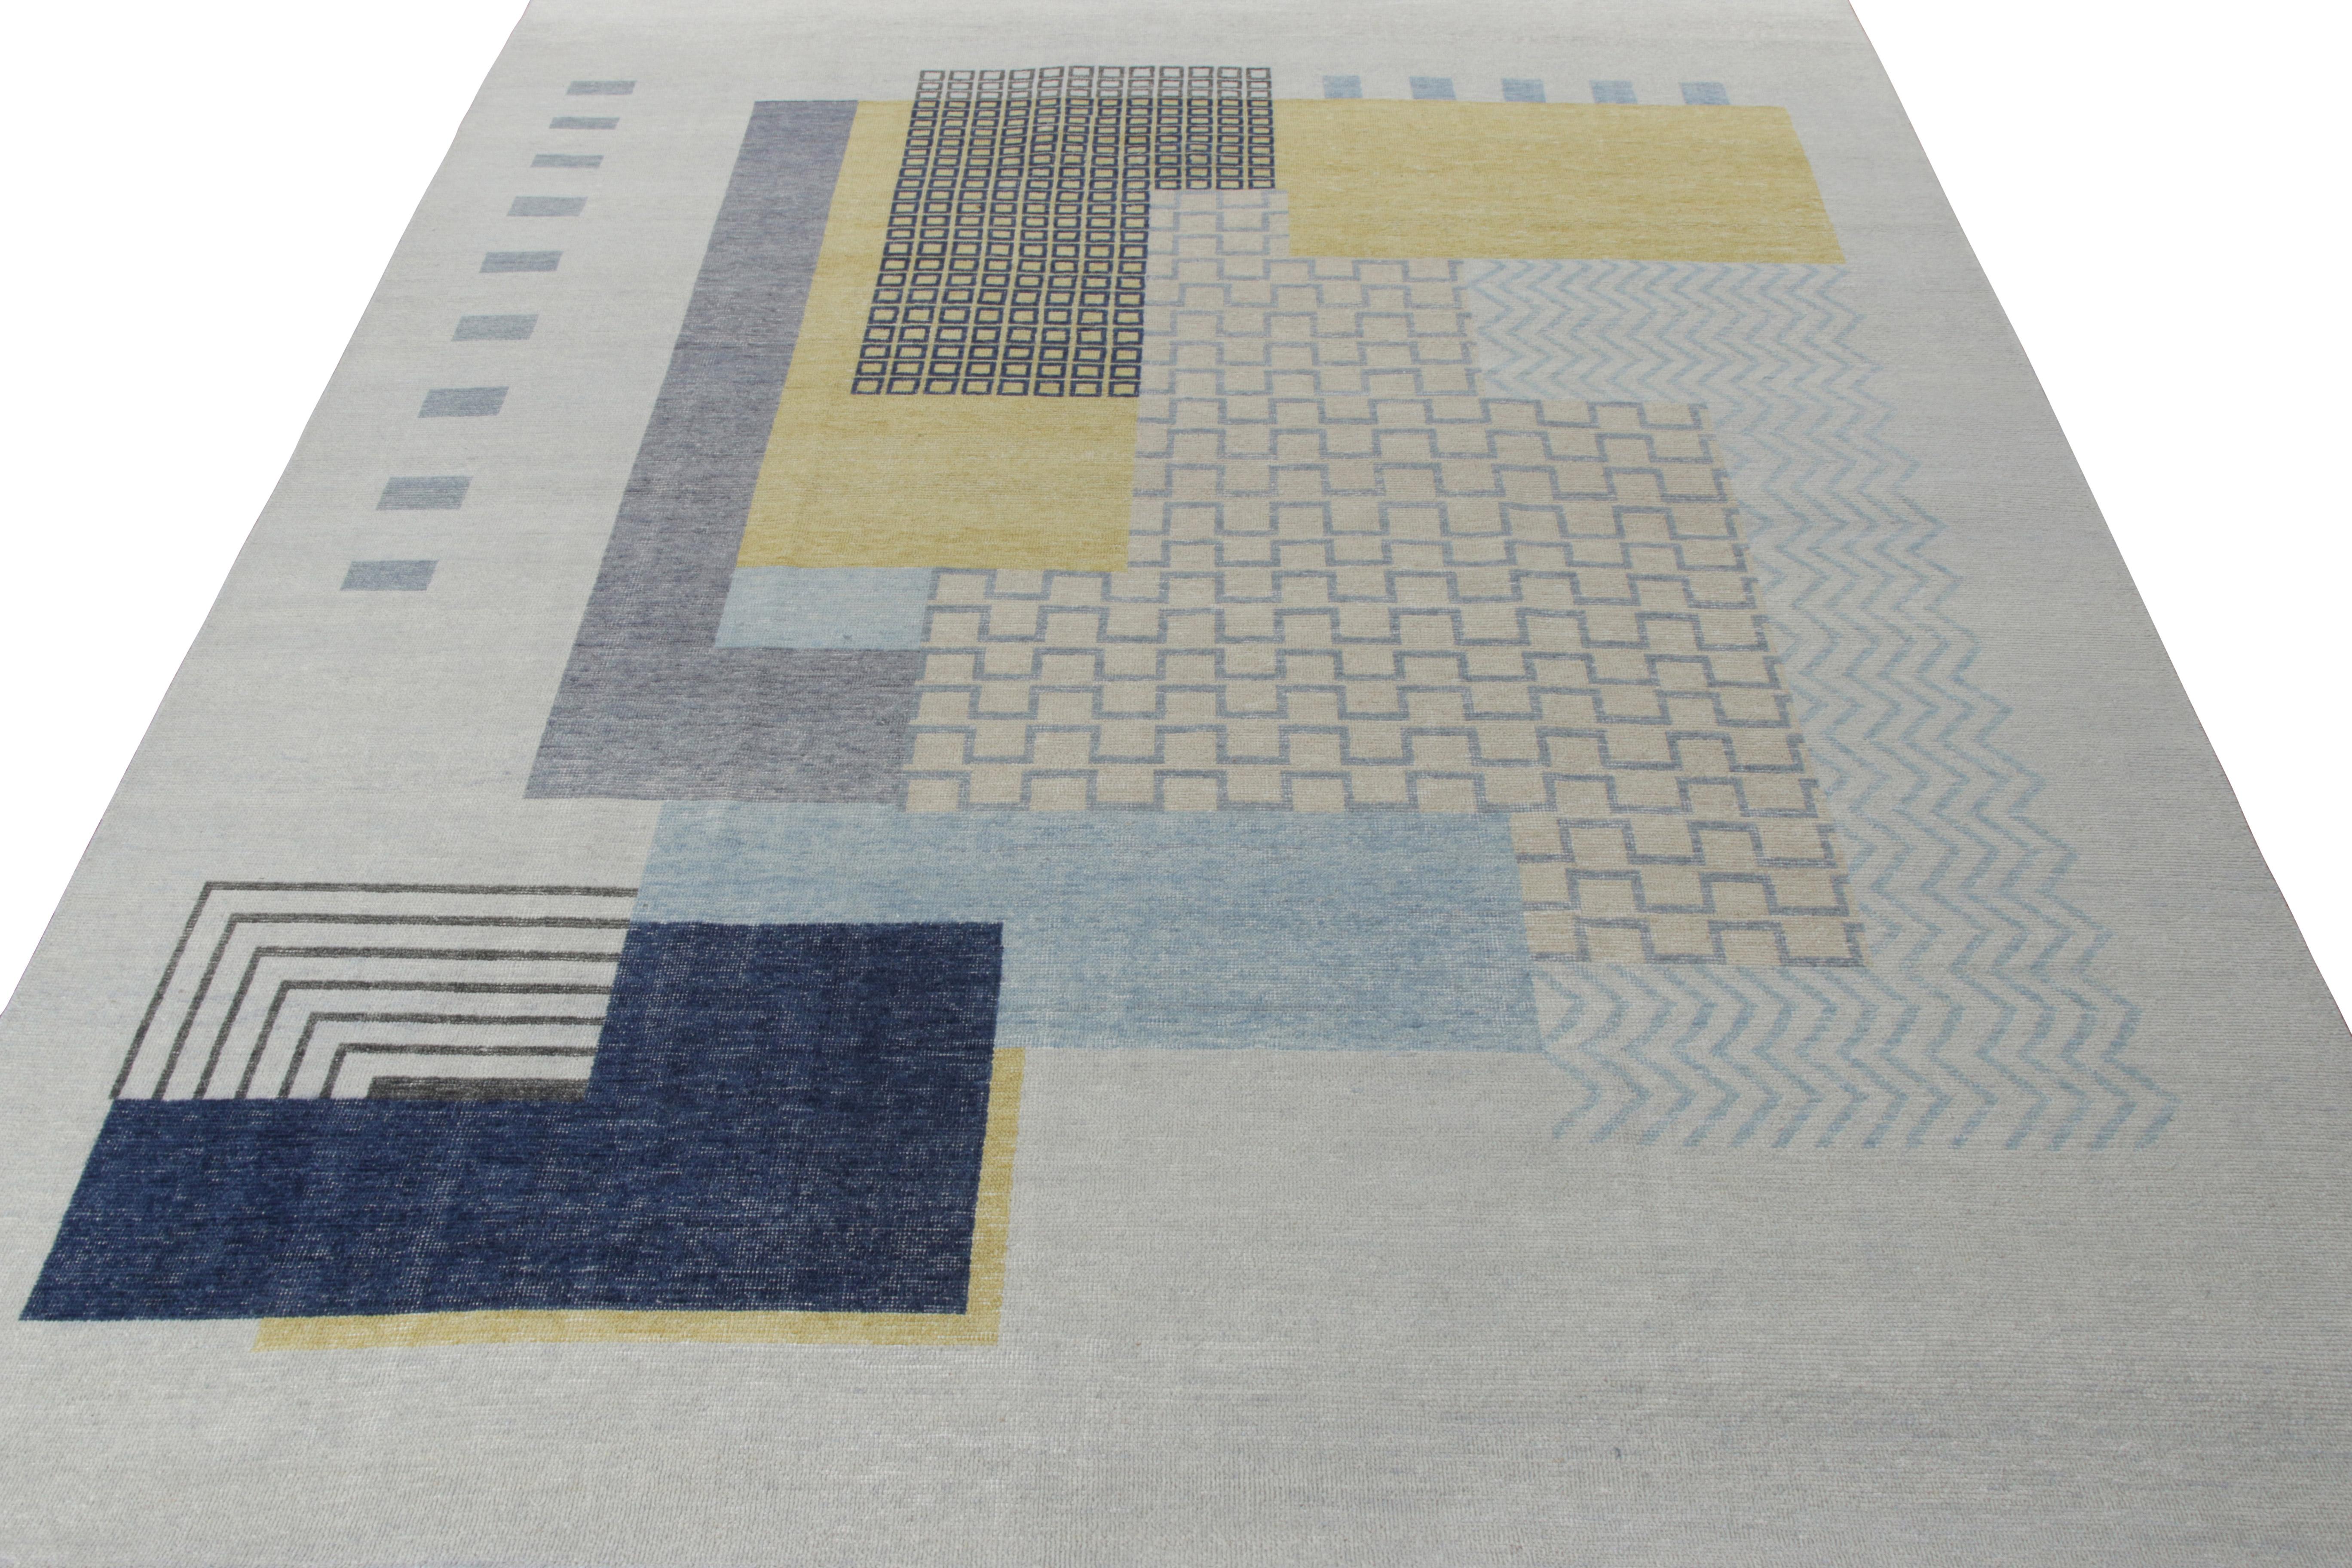 A 9x12 hand-knotted inspiration from Rug & Kilim’s Homage collection. Drawing on French Art Deco sensibilities that transmute themselves in a very modern adaptation of geometry in chic hues of blue, yellow and beige against a soothing gray